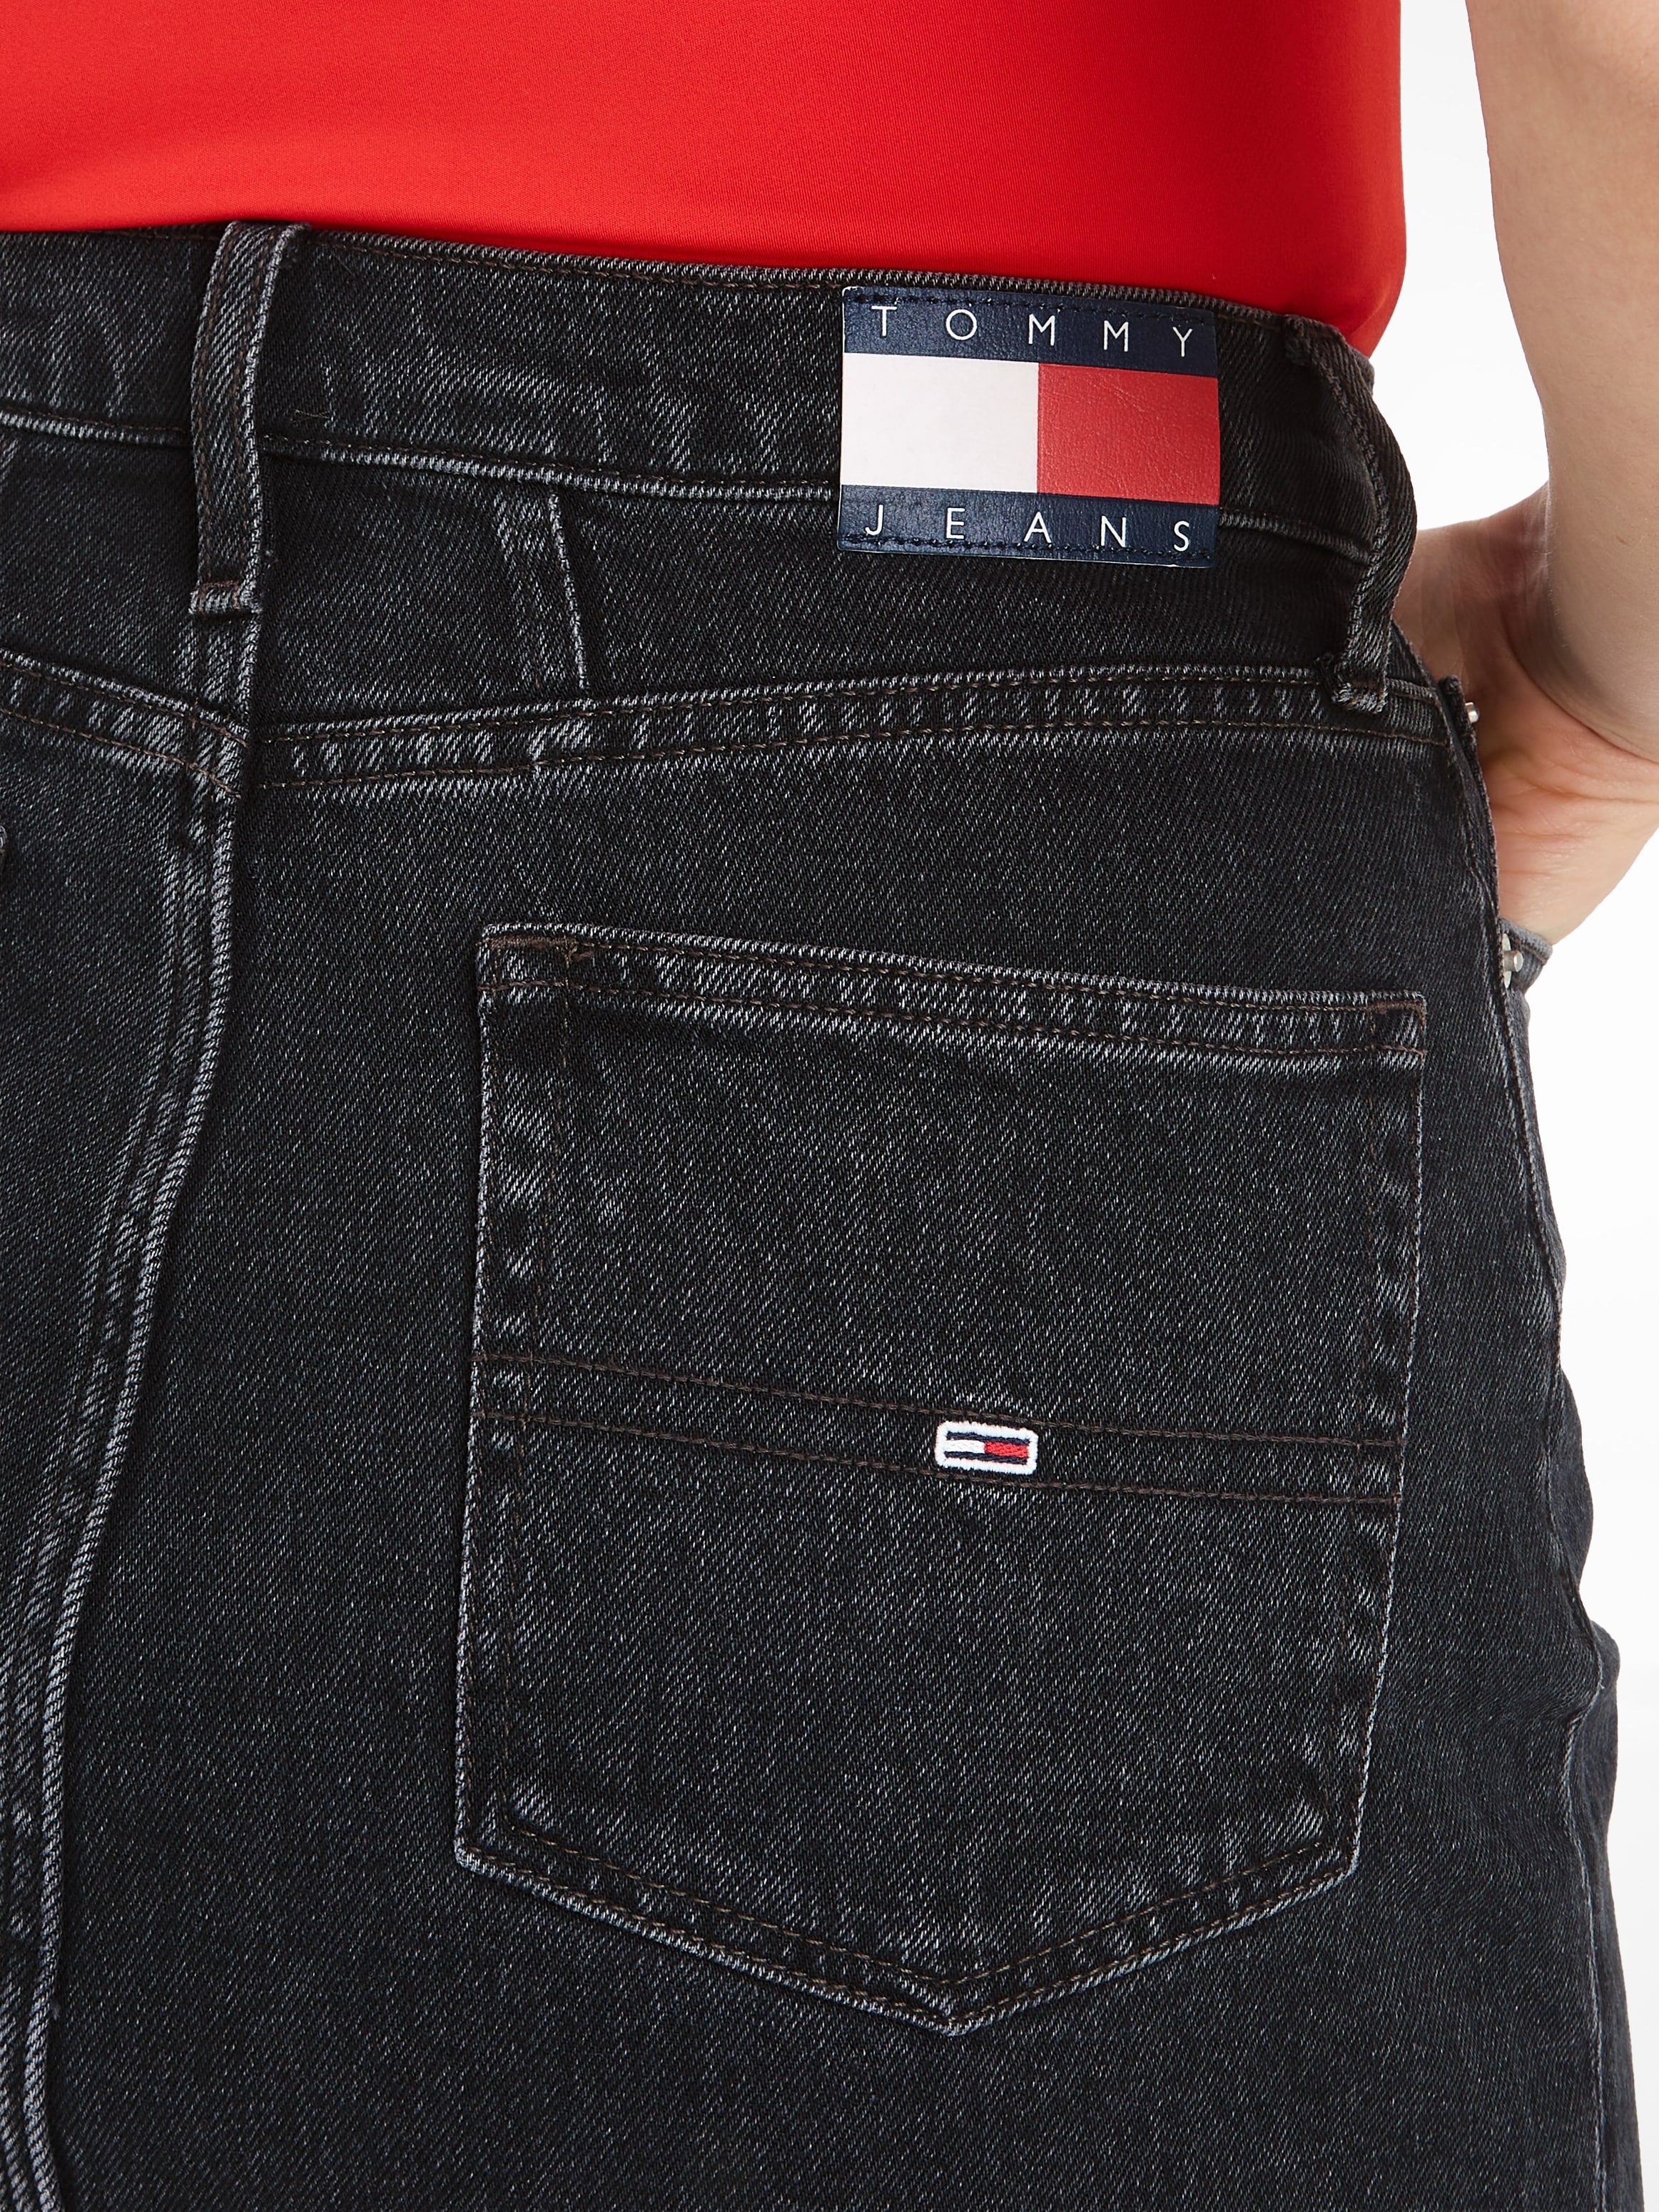 SKIRT Jeansrock OTTO bei mit CG4181«, online Jeans Tommy »MOM UH Logostickerei